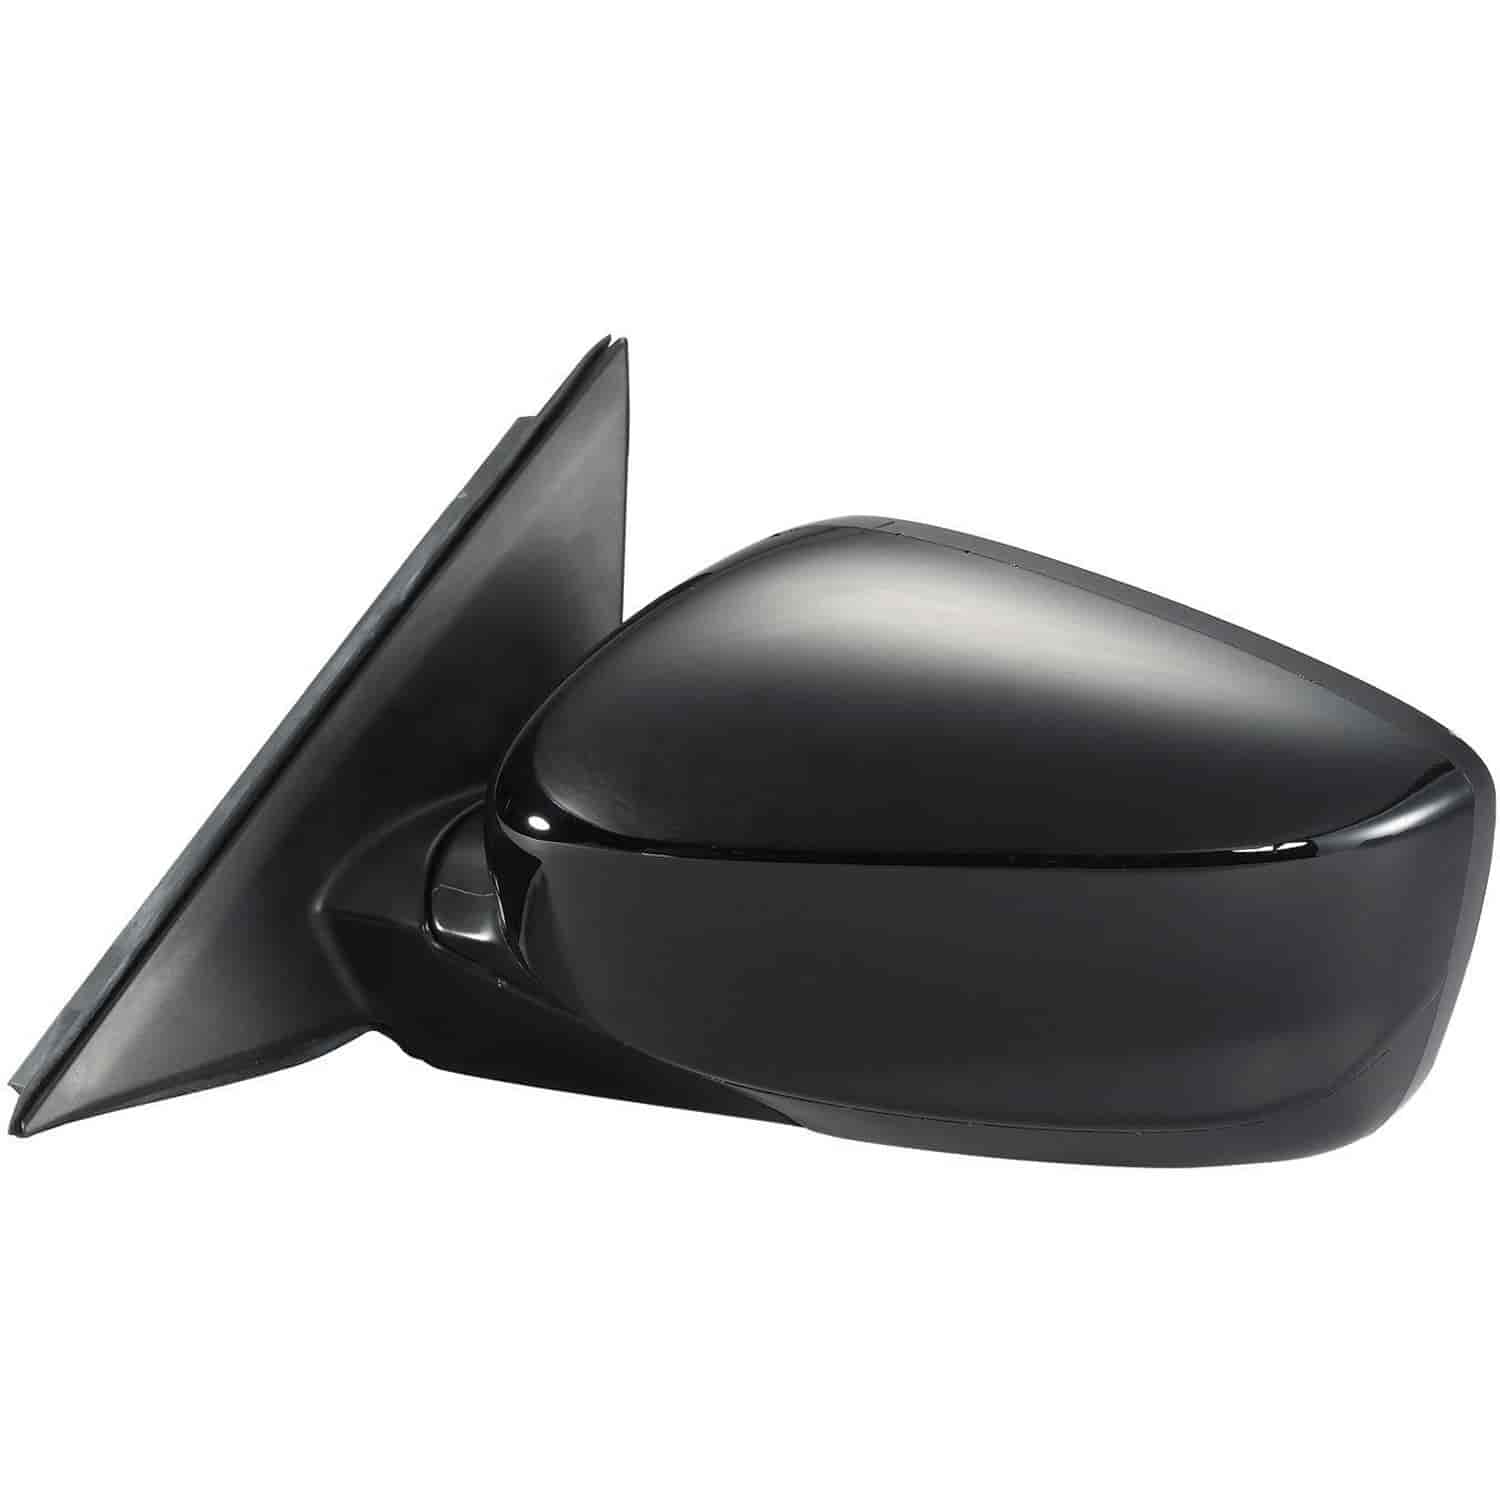 OEM Style Replacement mirror for 08-12 Honda Accord Sedan driver side mirror tested to fit and funct